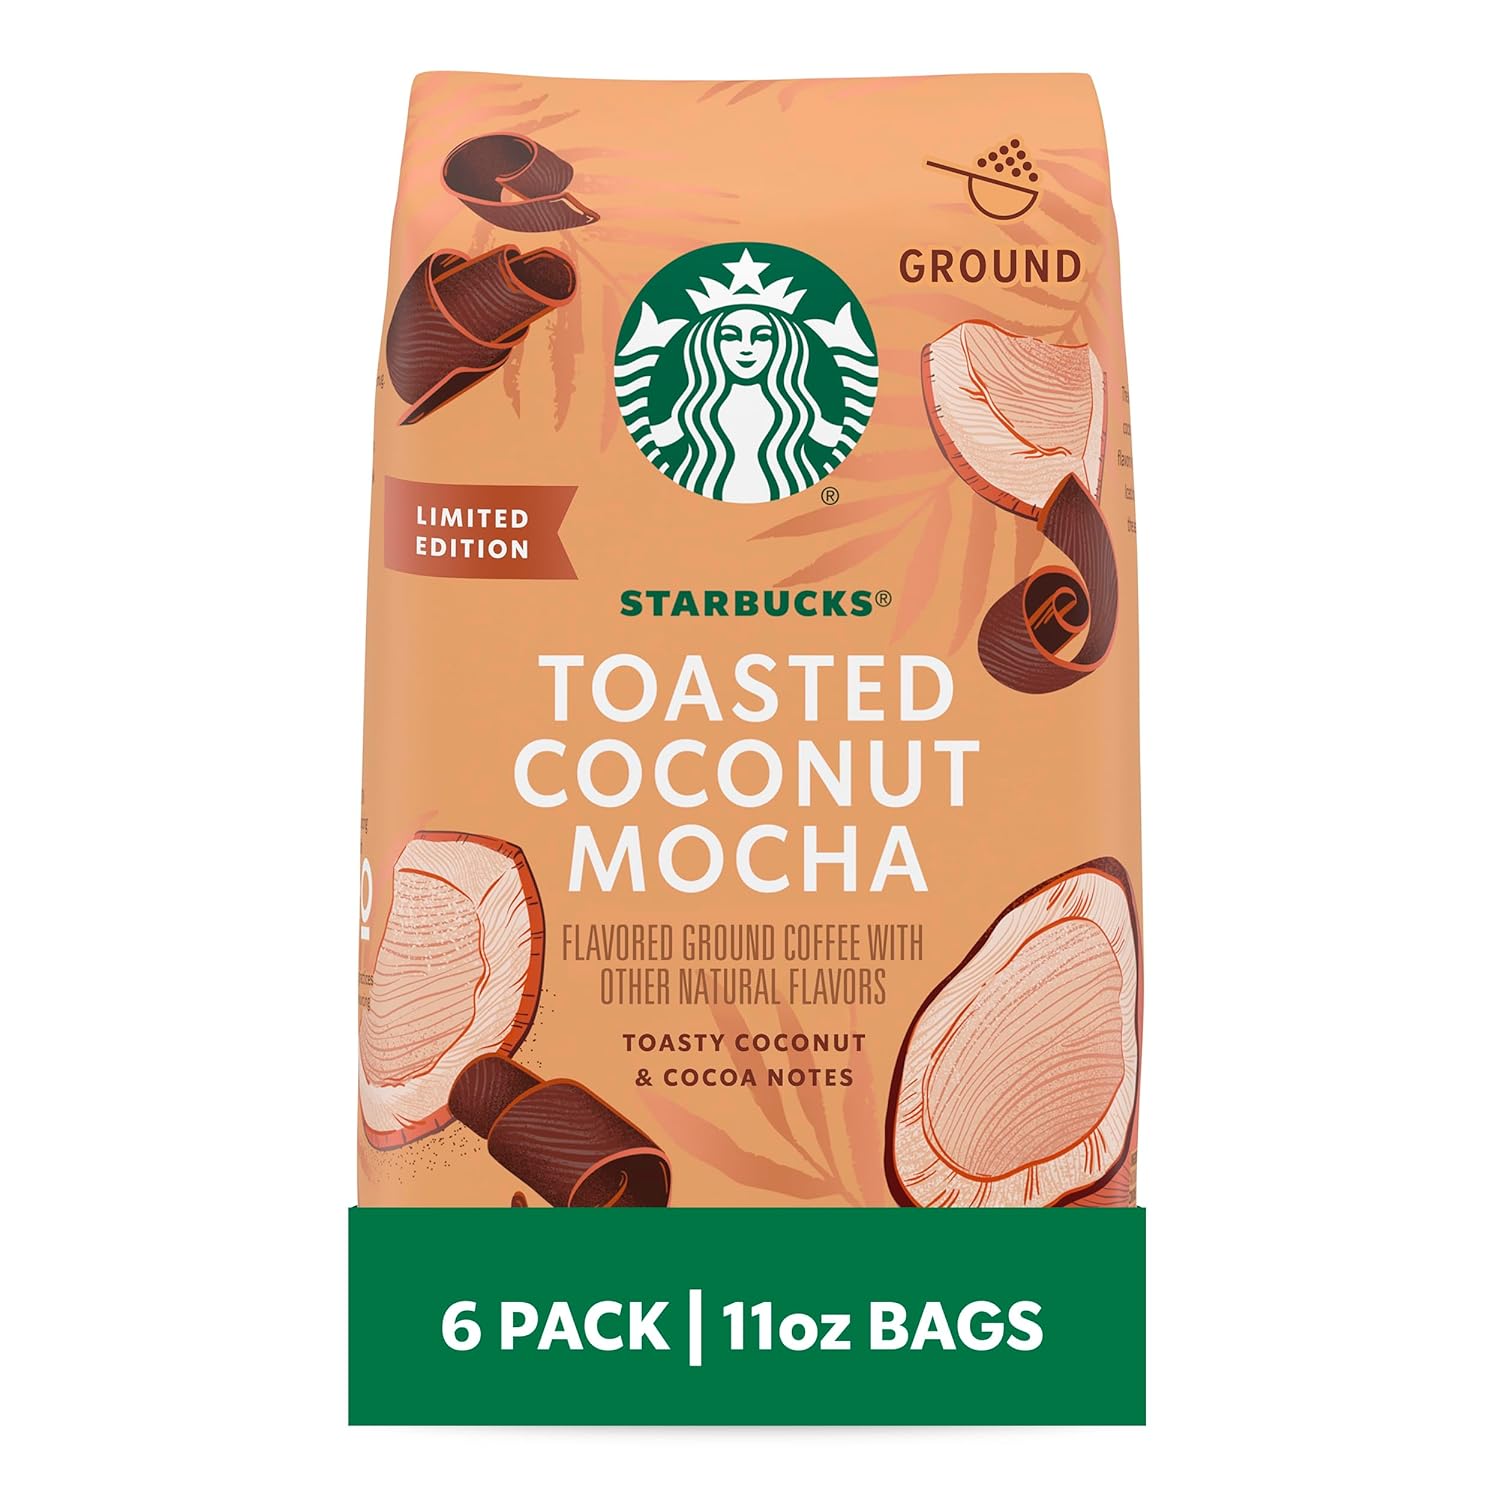 Starbucks Naturally Flavored Ground Coffee, Toasted Coconut Mocha 100% Arabica, Limited Edition, 6 bags (11 oz)